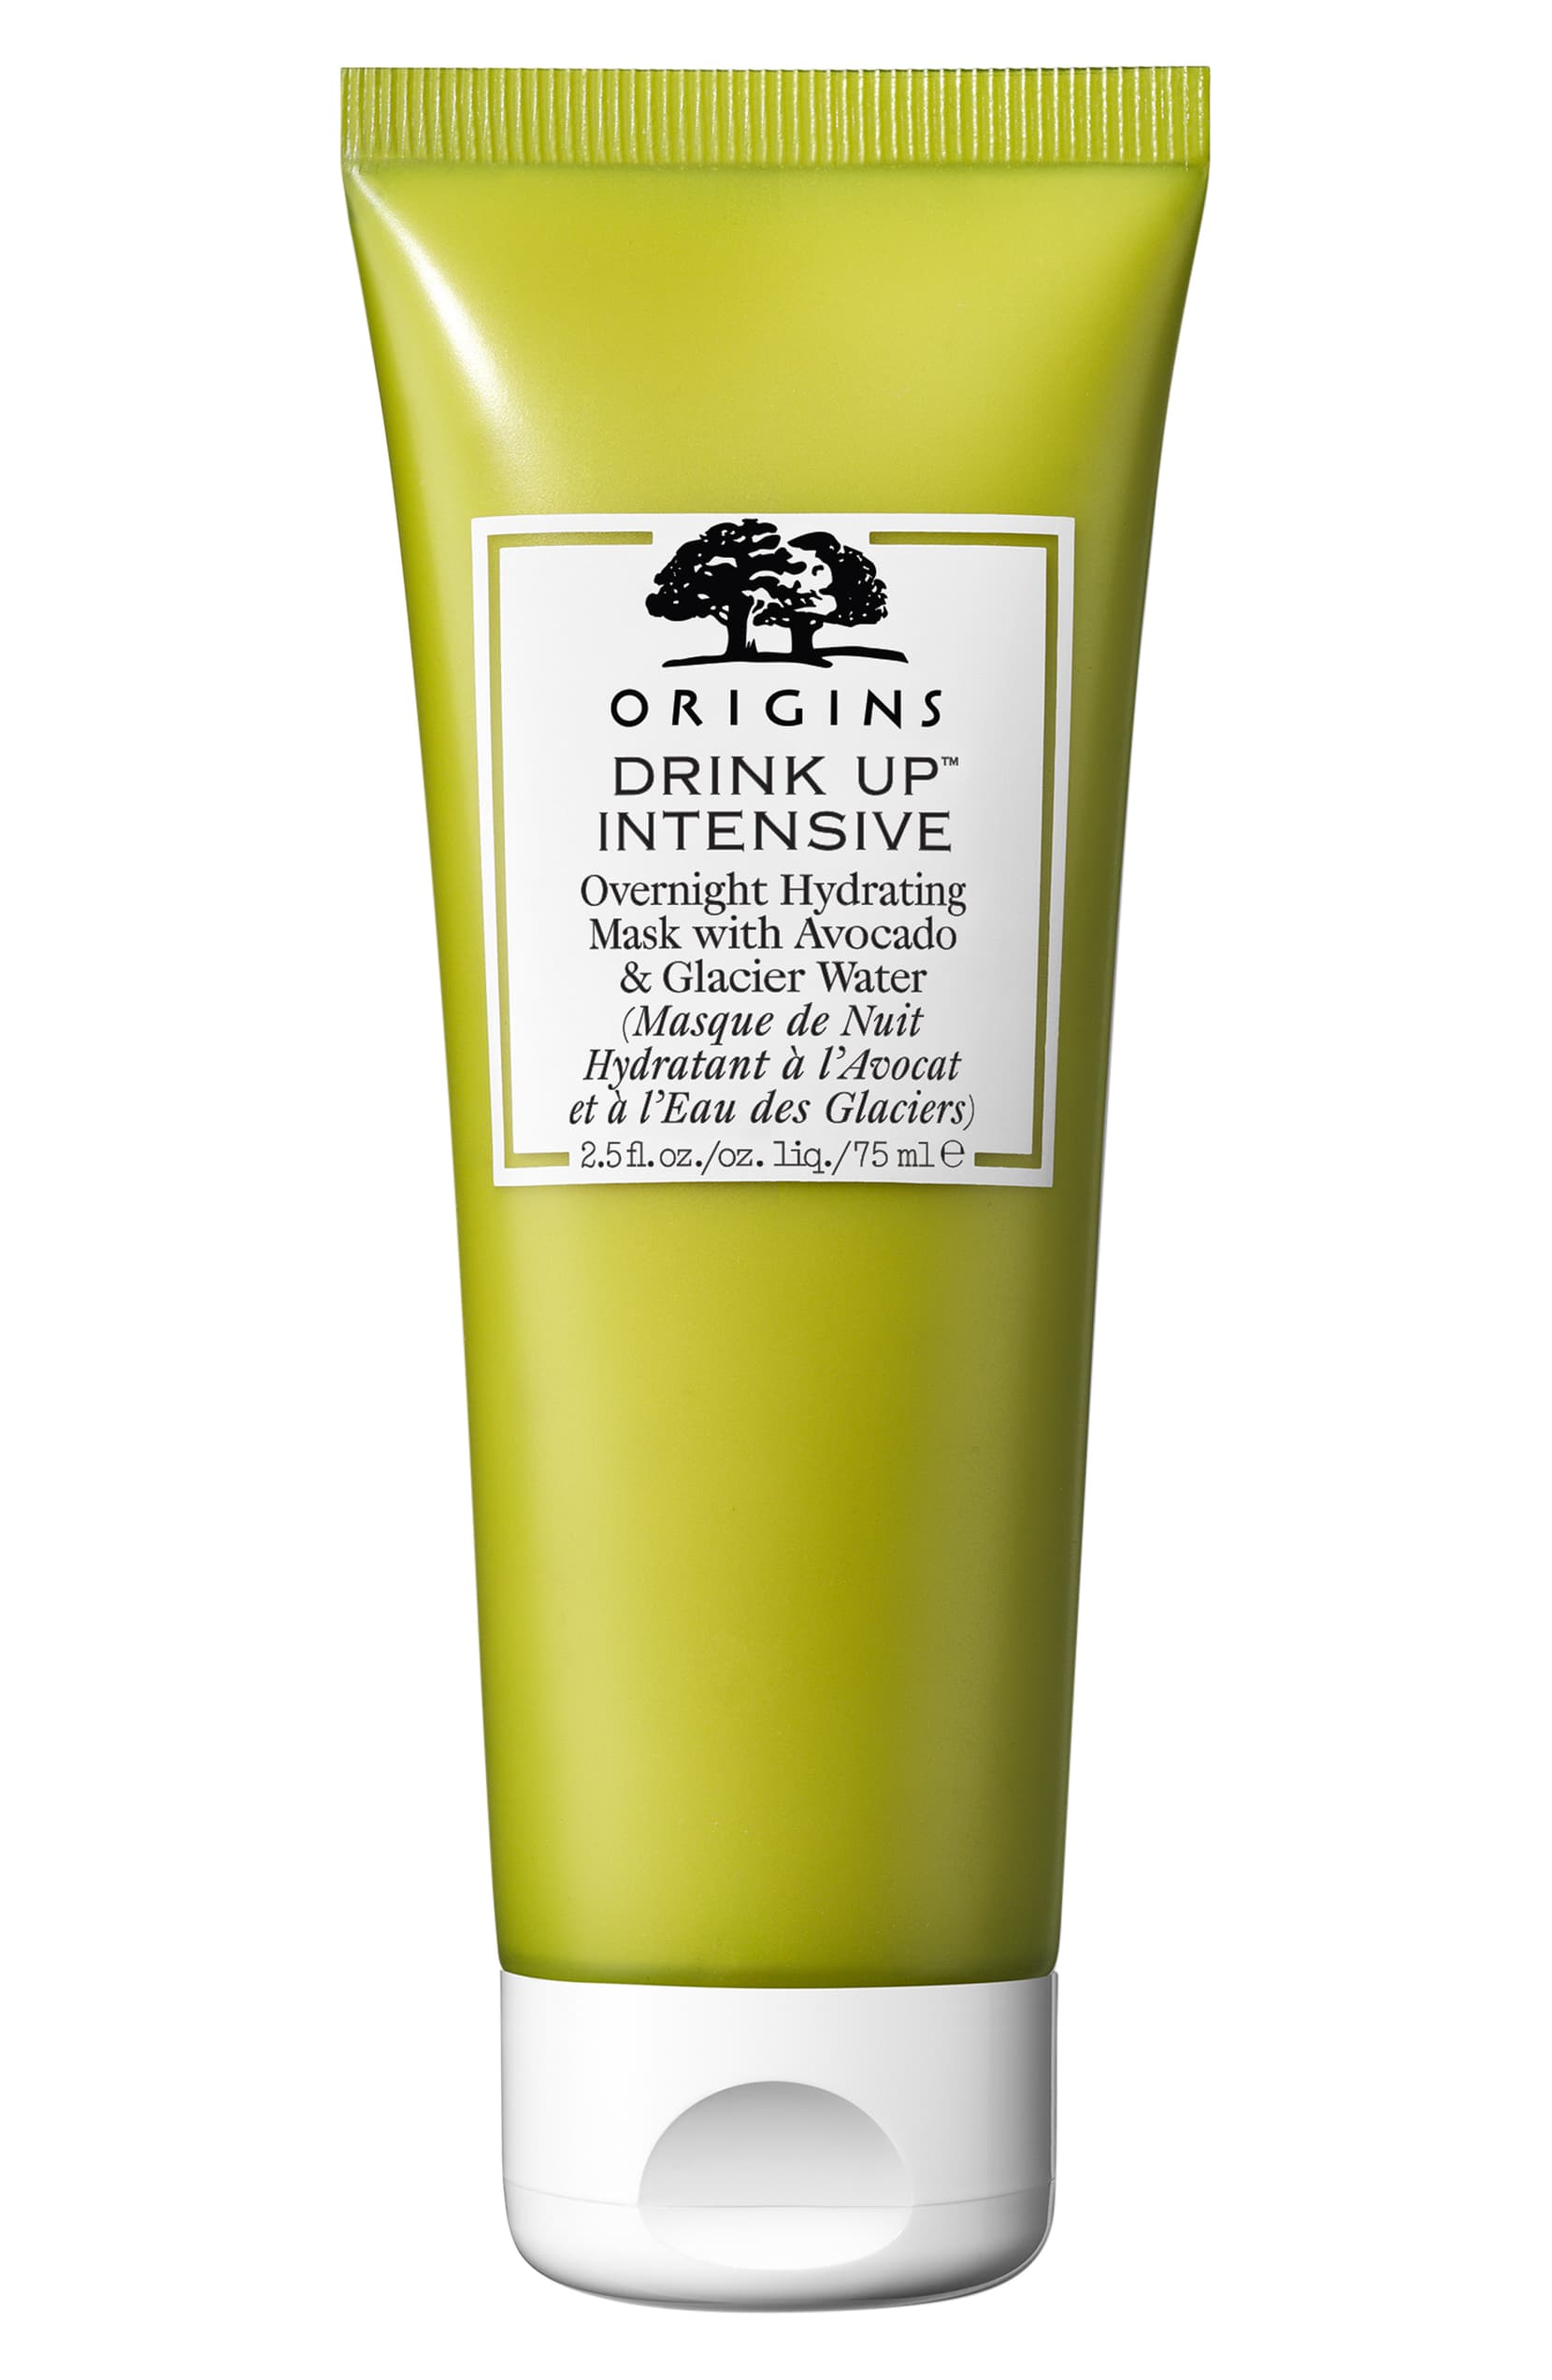 Origins Drink Up Intensive Overnight Hydrating Mask with Avocado & Glacier Water - eCosmeticWorld